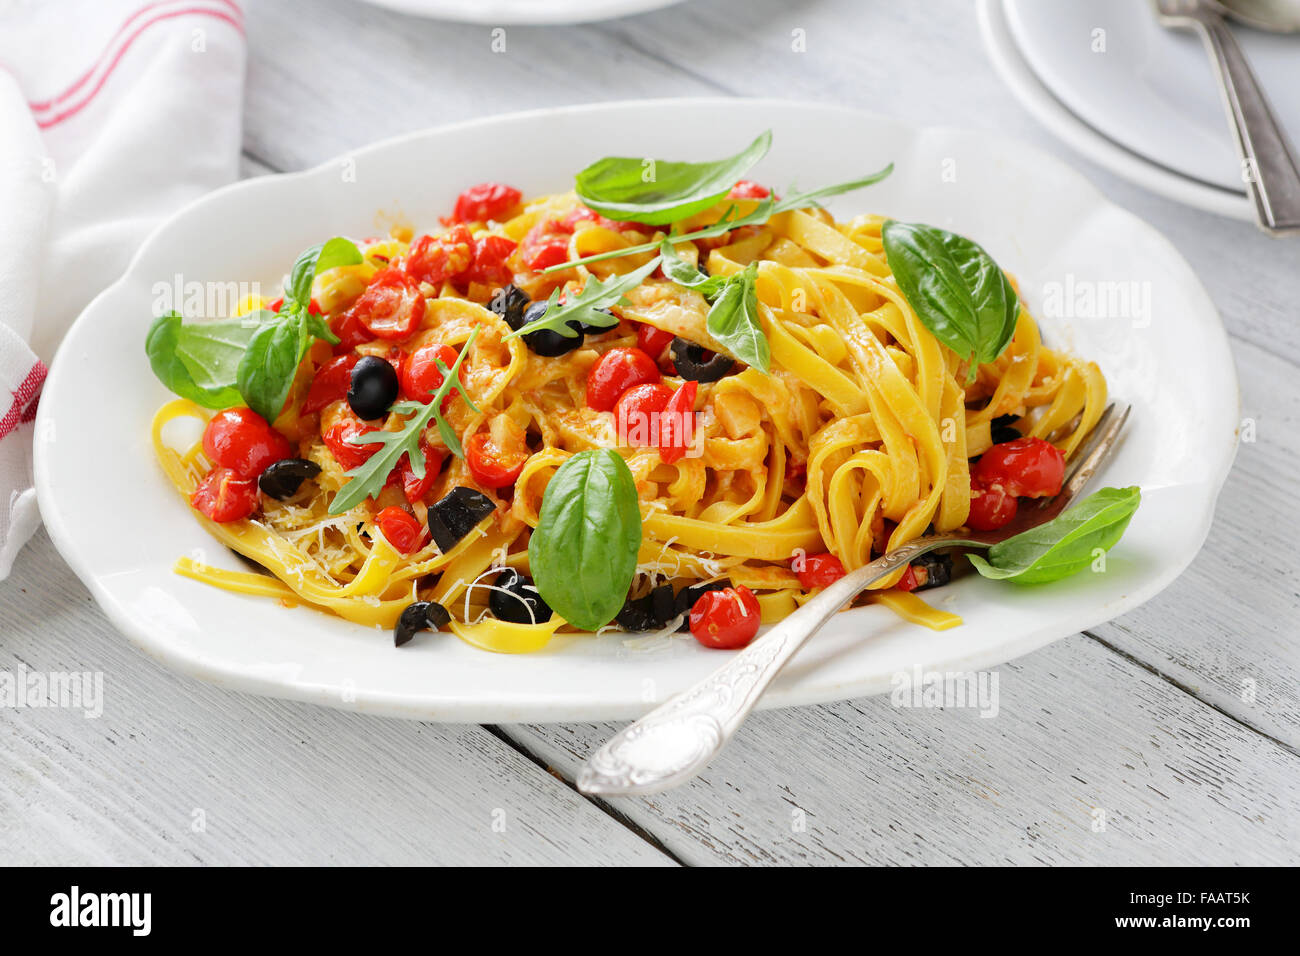 tasty pasta with sauce on plate, food close-up Stock Photo